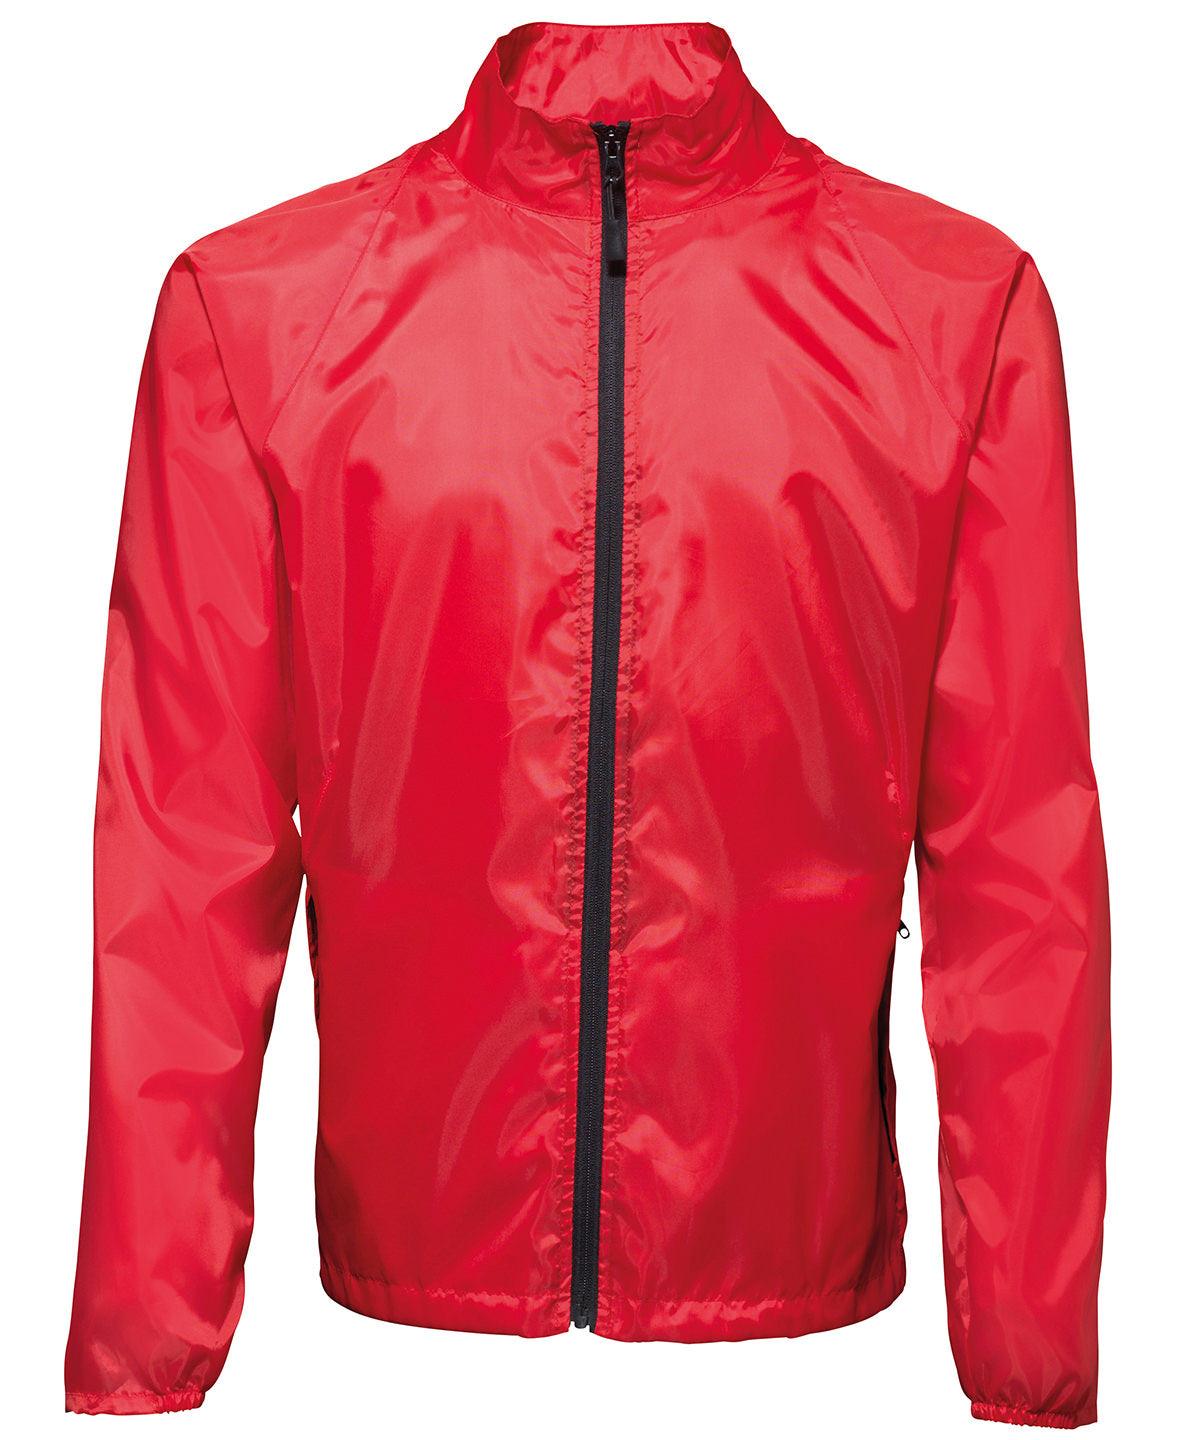 Red/Black - Contrast lightweight jacket Jackets 2786 Alfresco Dining, Camo, Jackets & Coats, Lightweight layers, Rebrandable, S/S 19 Trend Colours Schoolwear Centres